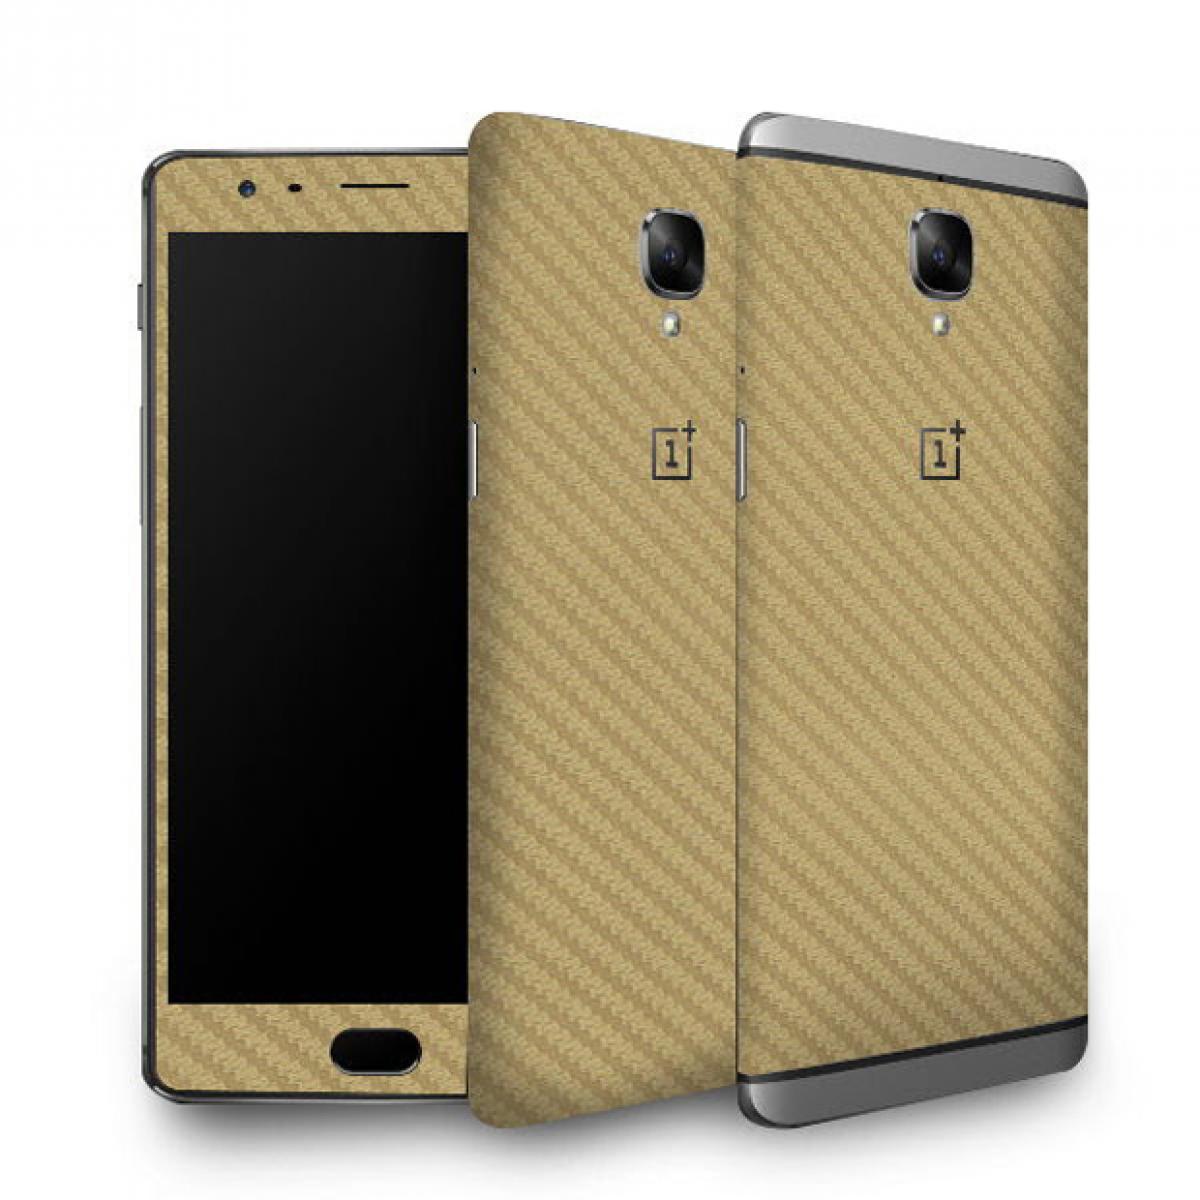 Skin4gadgets launches OnePlus 3 Carbon fiber skin in India  